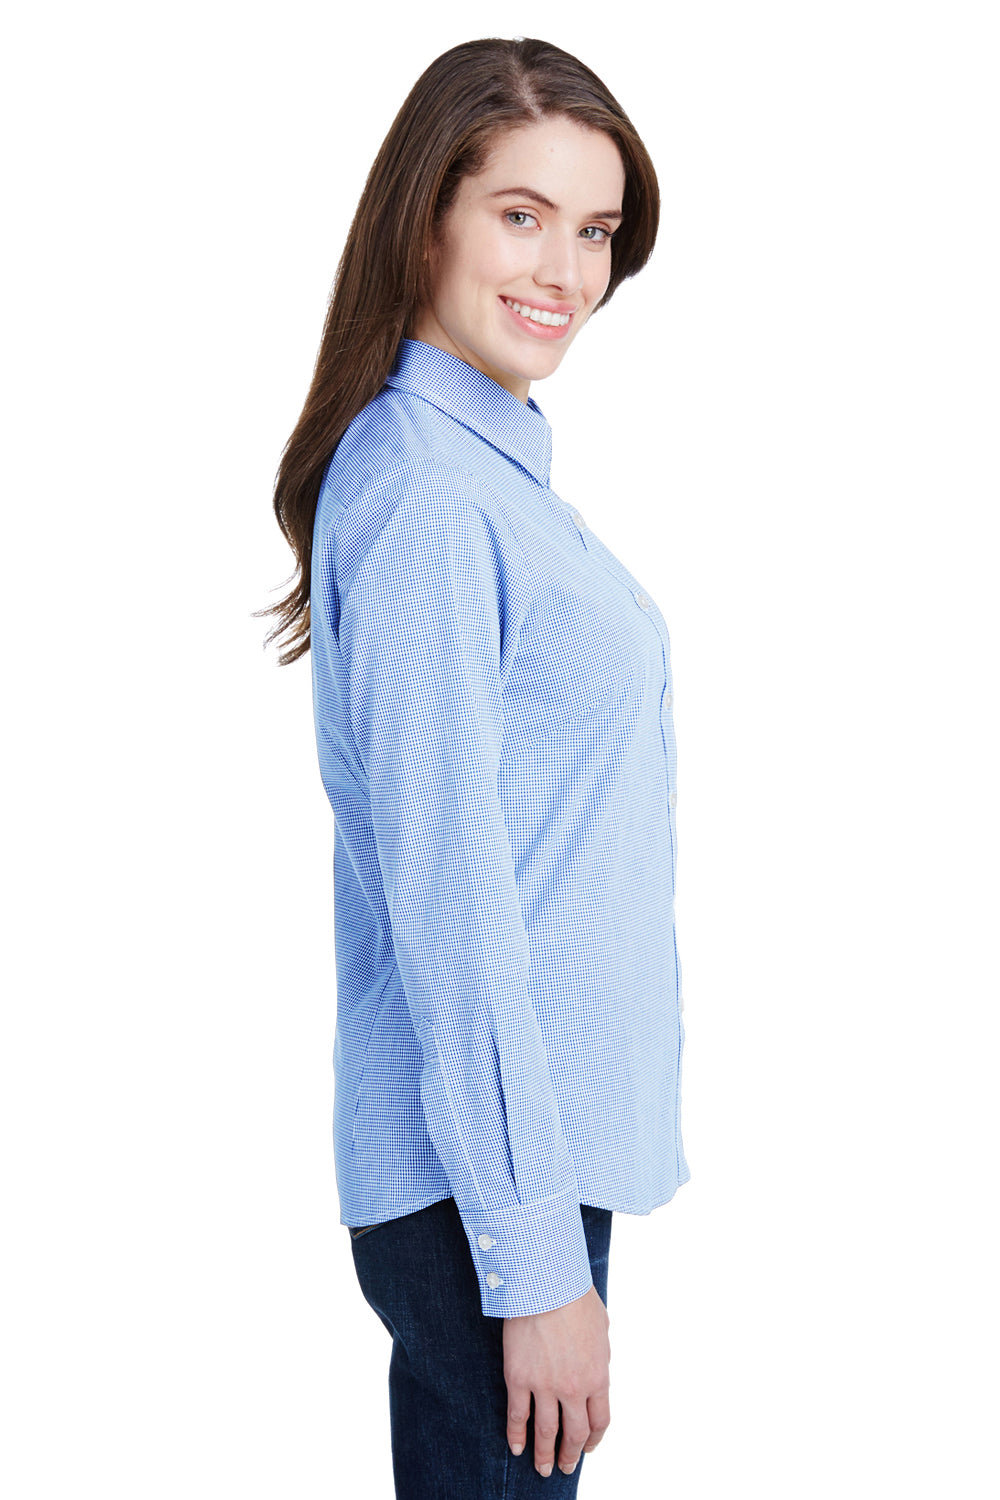 Artisan Collection RP320 Womens Microcheck Gingham Long Sleeve Button Down Shirt Light Blue/White Model Side